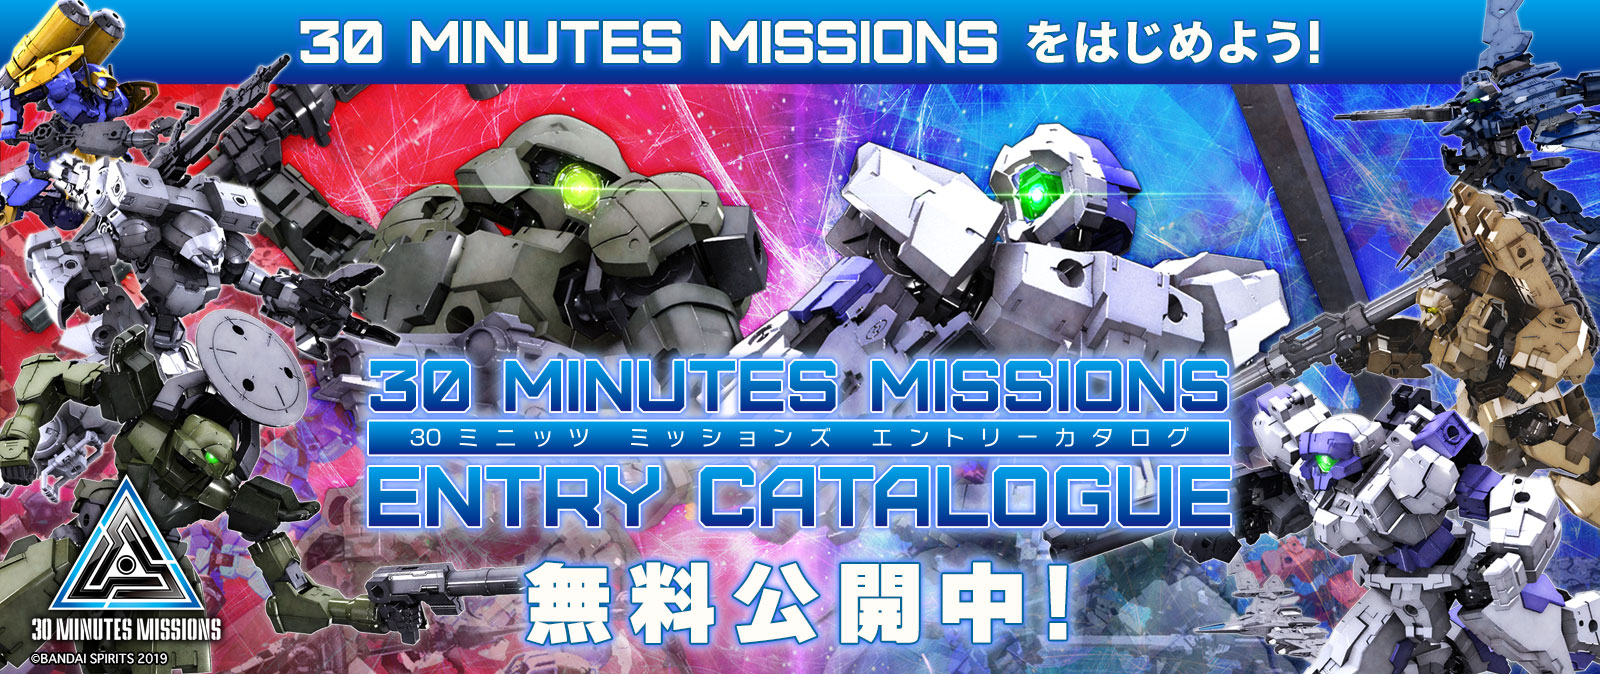 30 MINUTES MISSIONS をはじめよう！ 30 MINUTES MISSIONS ENTRY CATALOGUE 無料公開中！